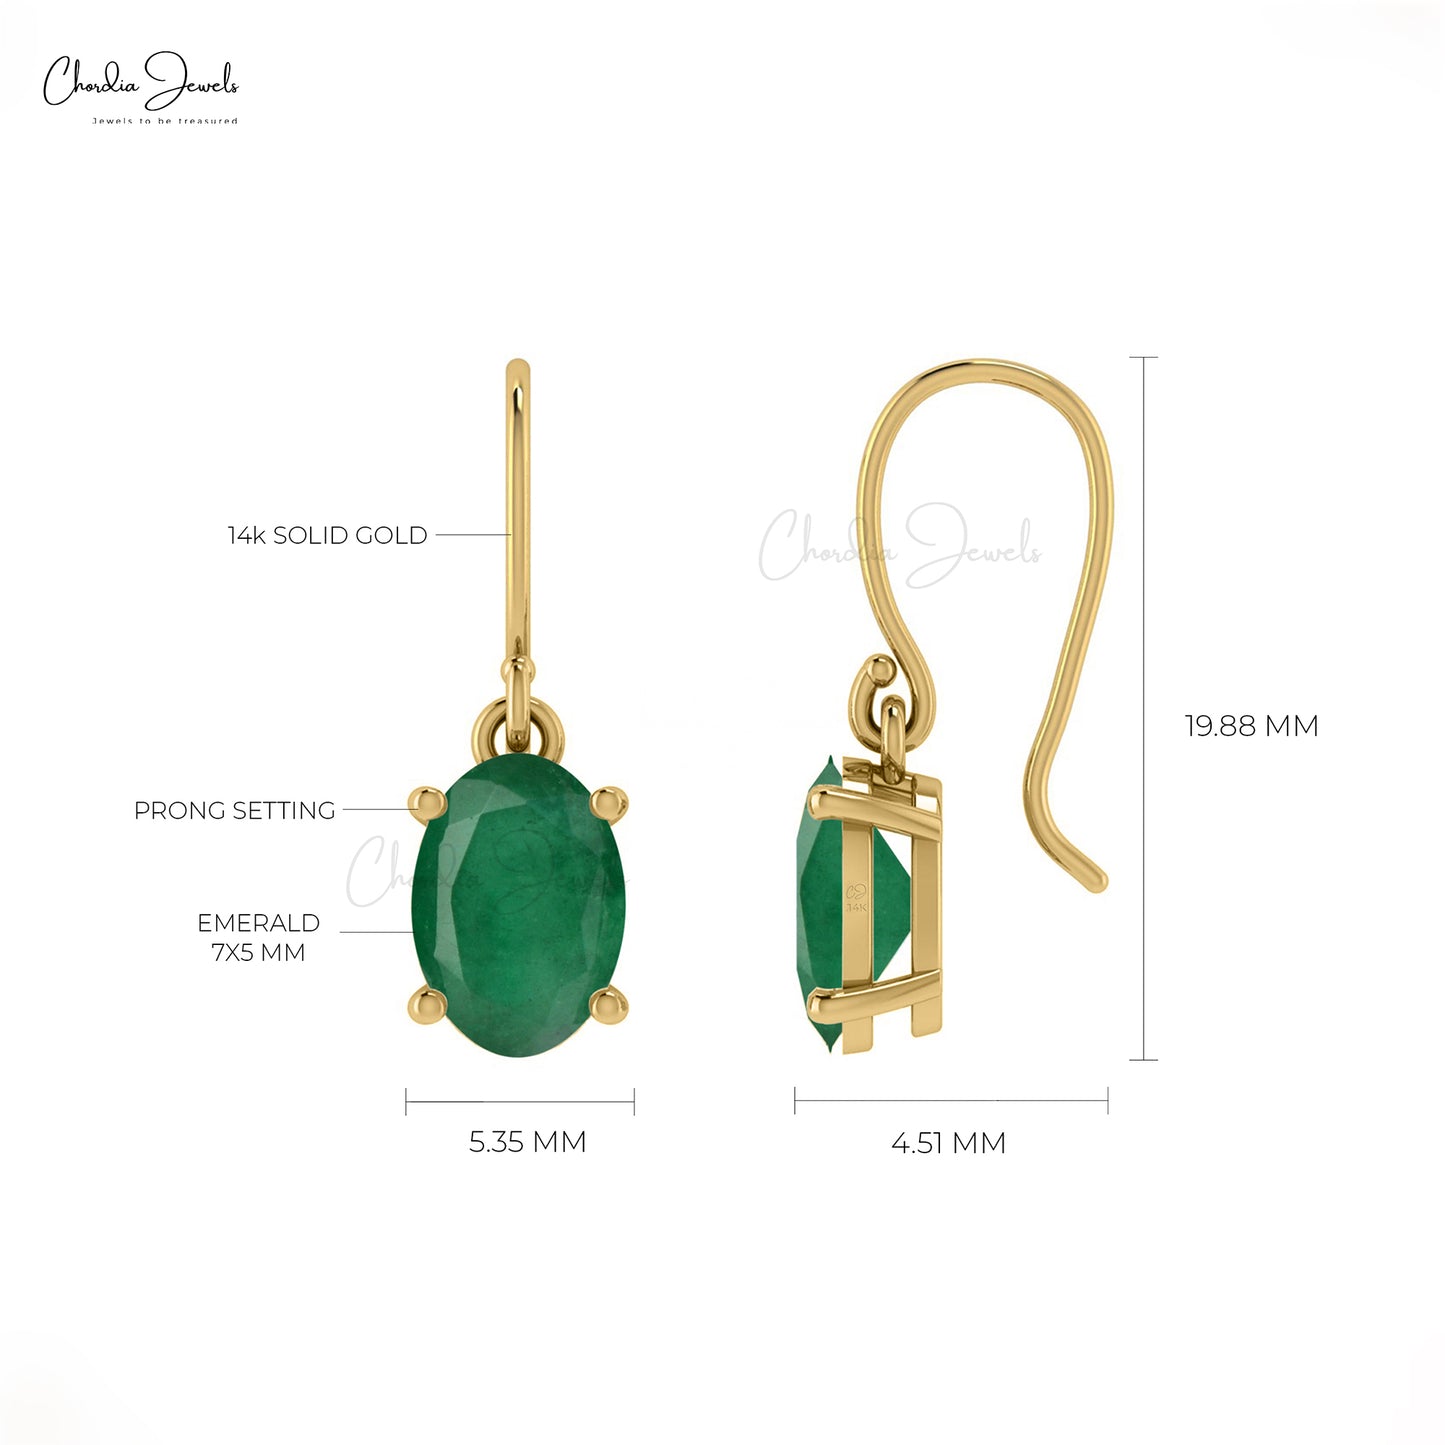 Emerald Solitaire Earrings